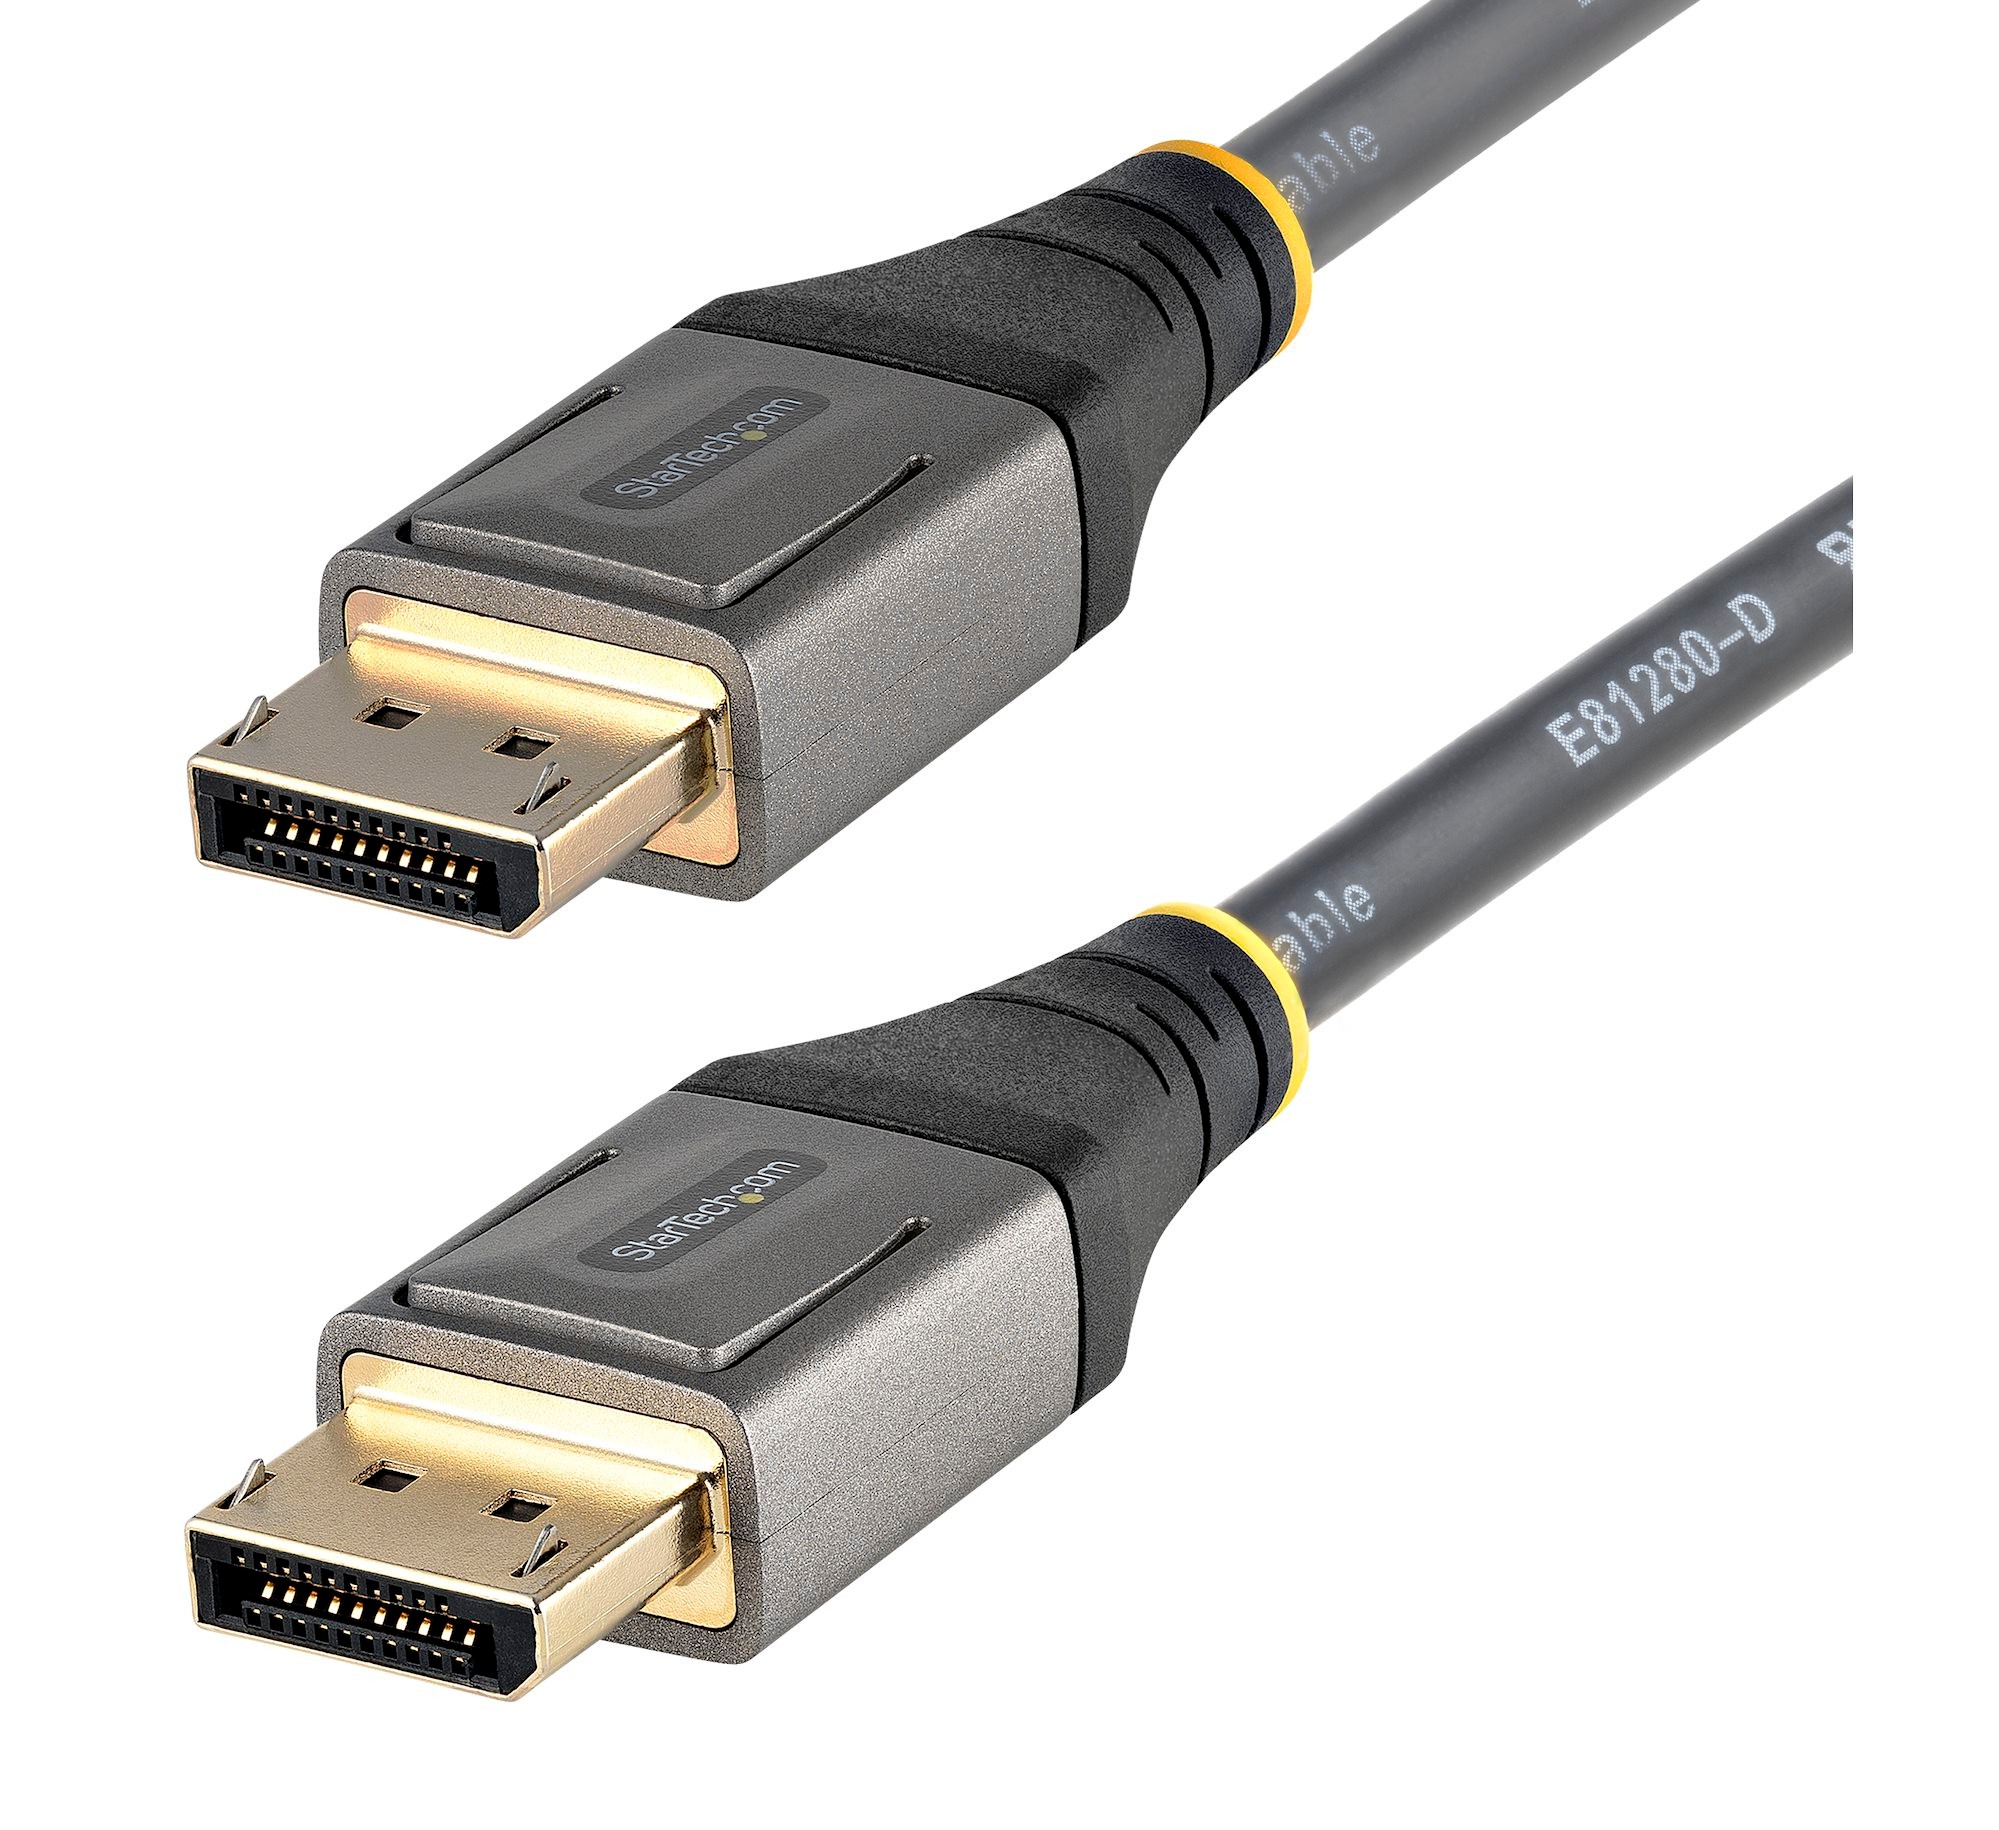 Combo Cable Displayport Dp + Cable Hdmi Full Hd 1,5 Metros